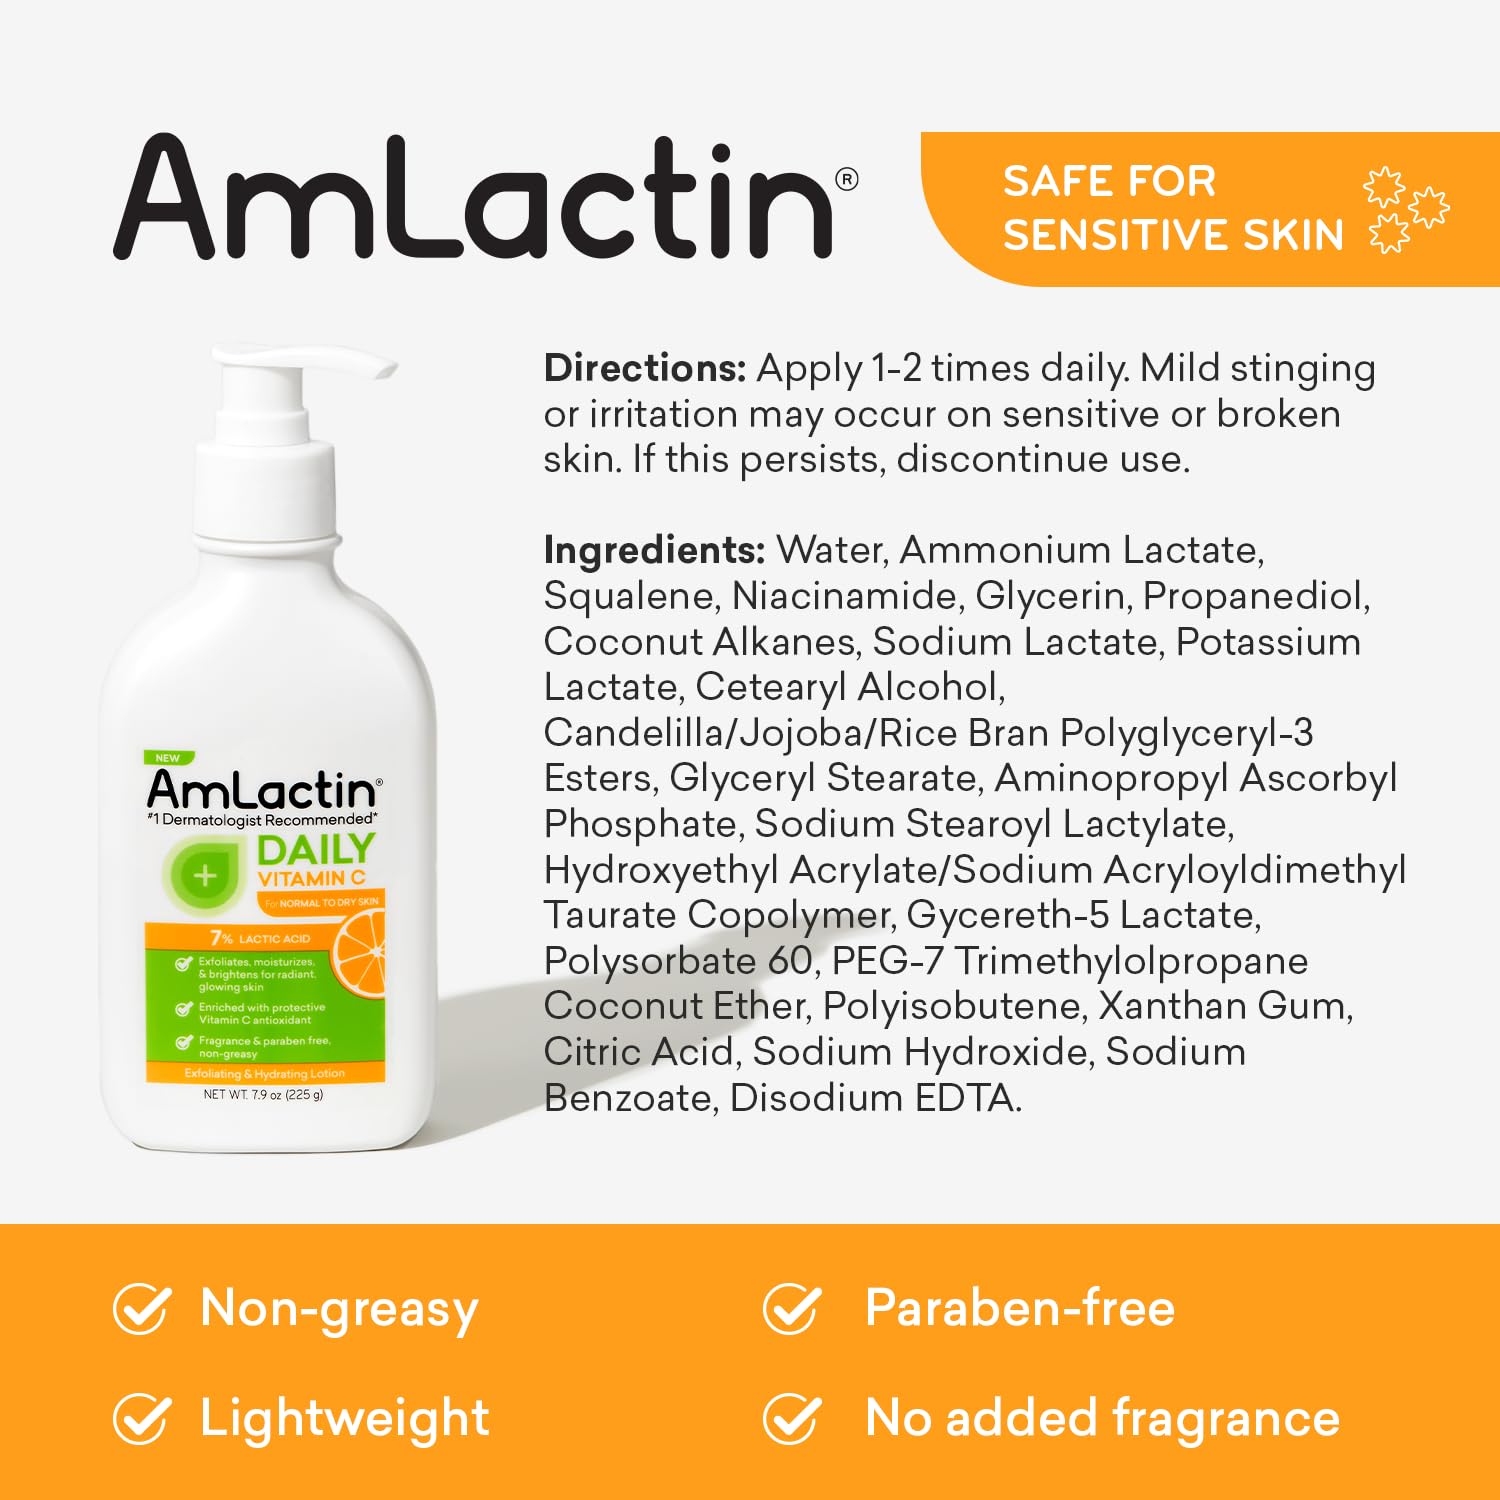 AmLactin Daily Vitamin C Lotion - 7.9 oz Body Lotion with 7% Lactic Acid - Skin-Brightening Exfoliator and Moisturizer for Dry Skin : Health & Household